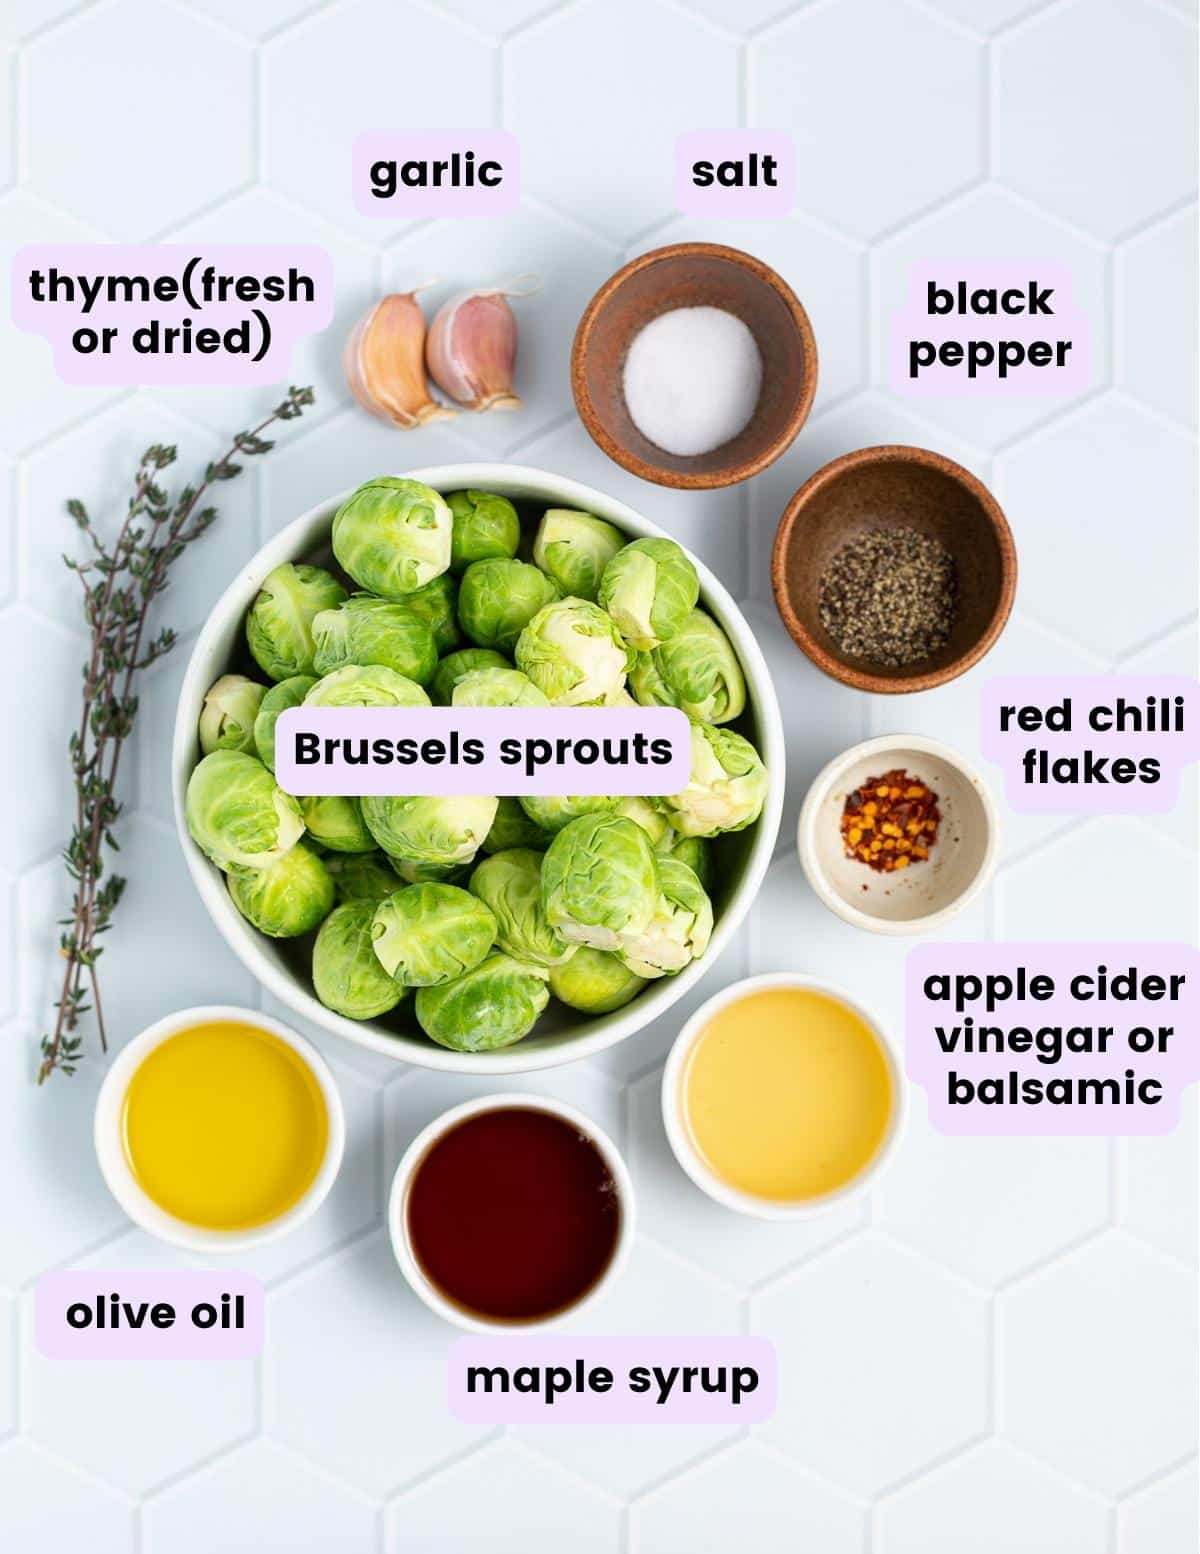 brussels sprouts, thyme, garlic, salt, black pepper, chili flakes, apple cider vinegar, maple syrup and olive oil